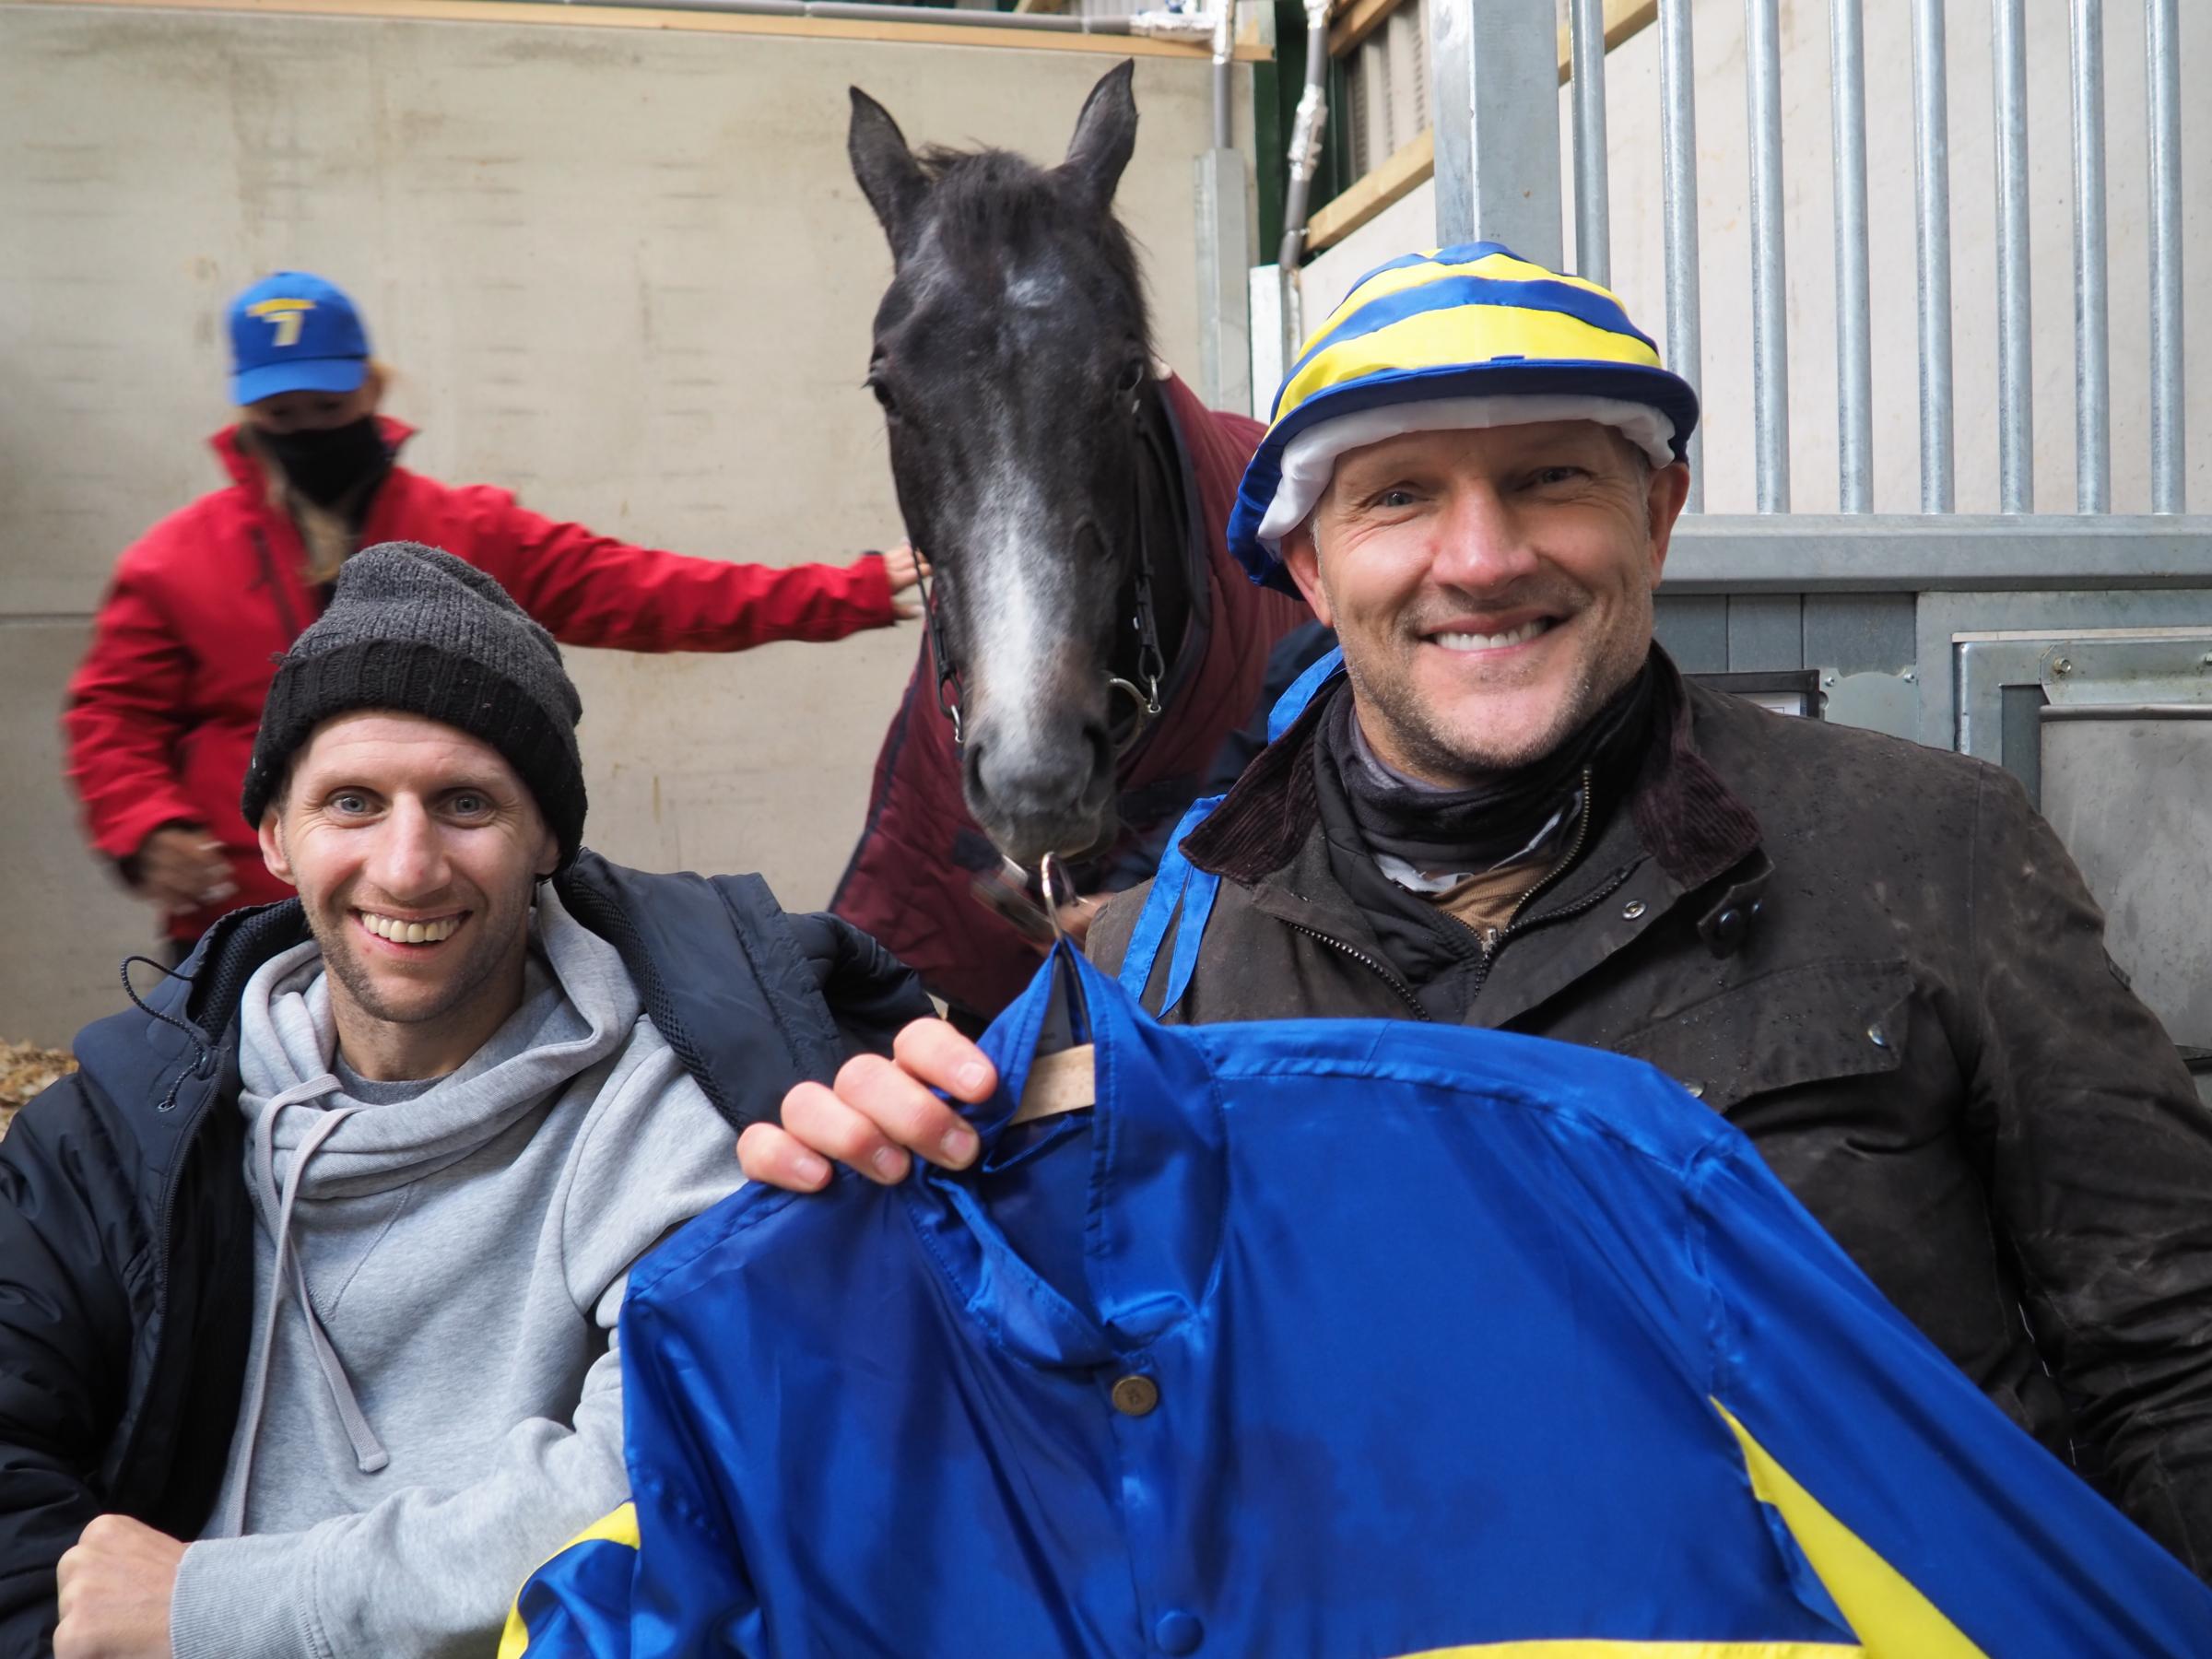 Burrow Seven racehorse named after Rob Burrow in MND fundraiser